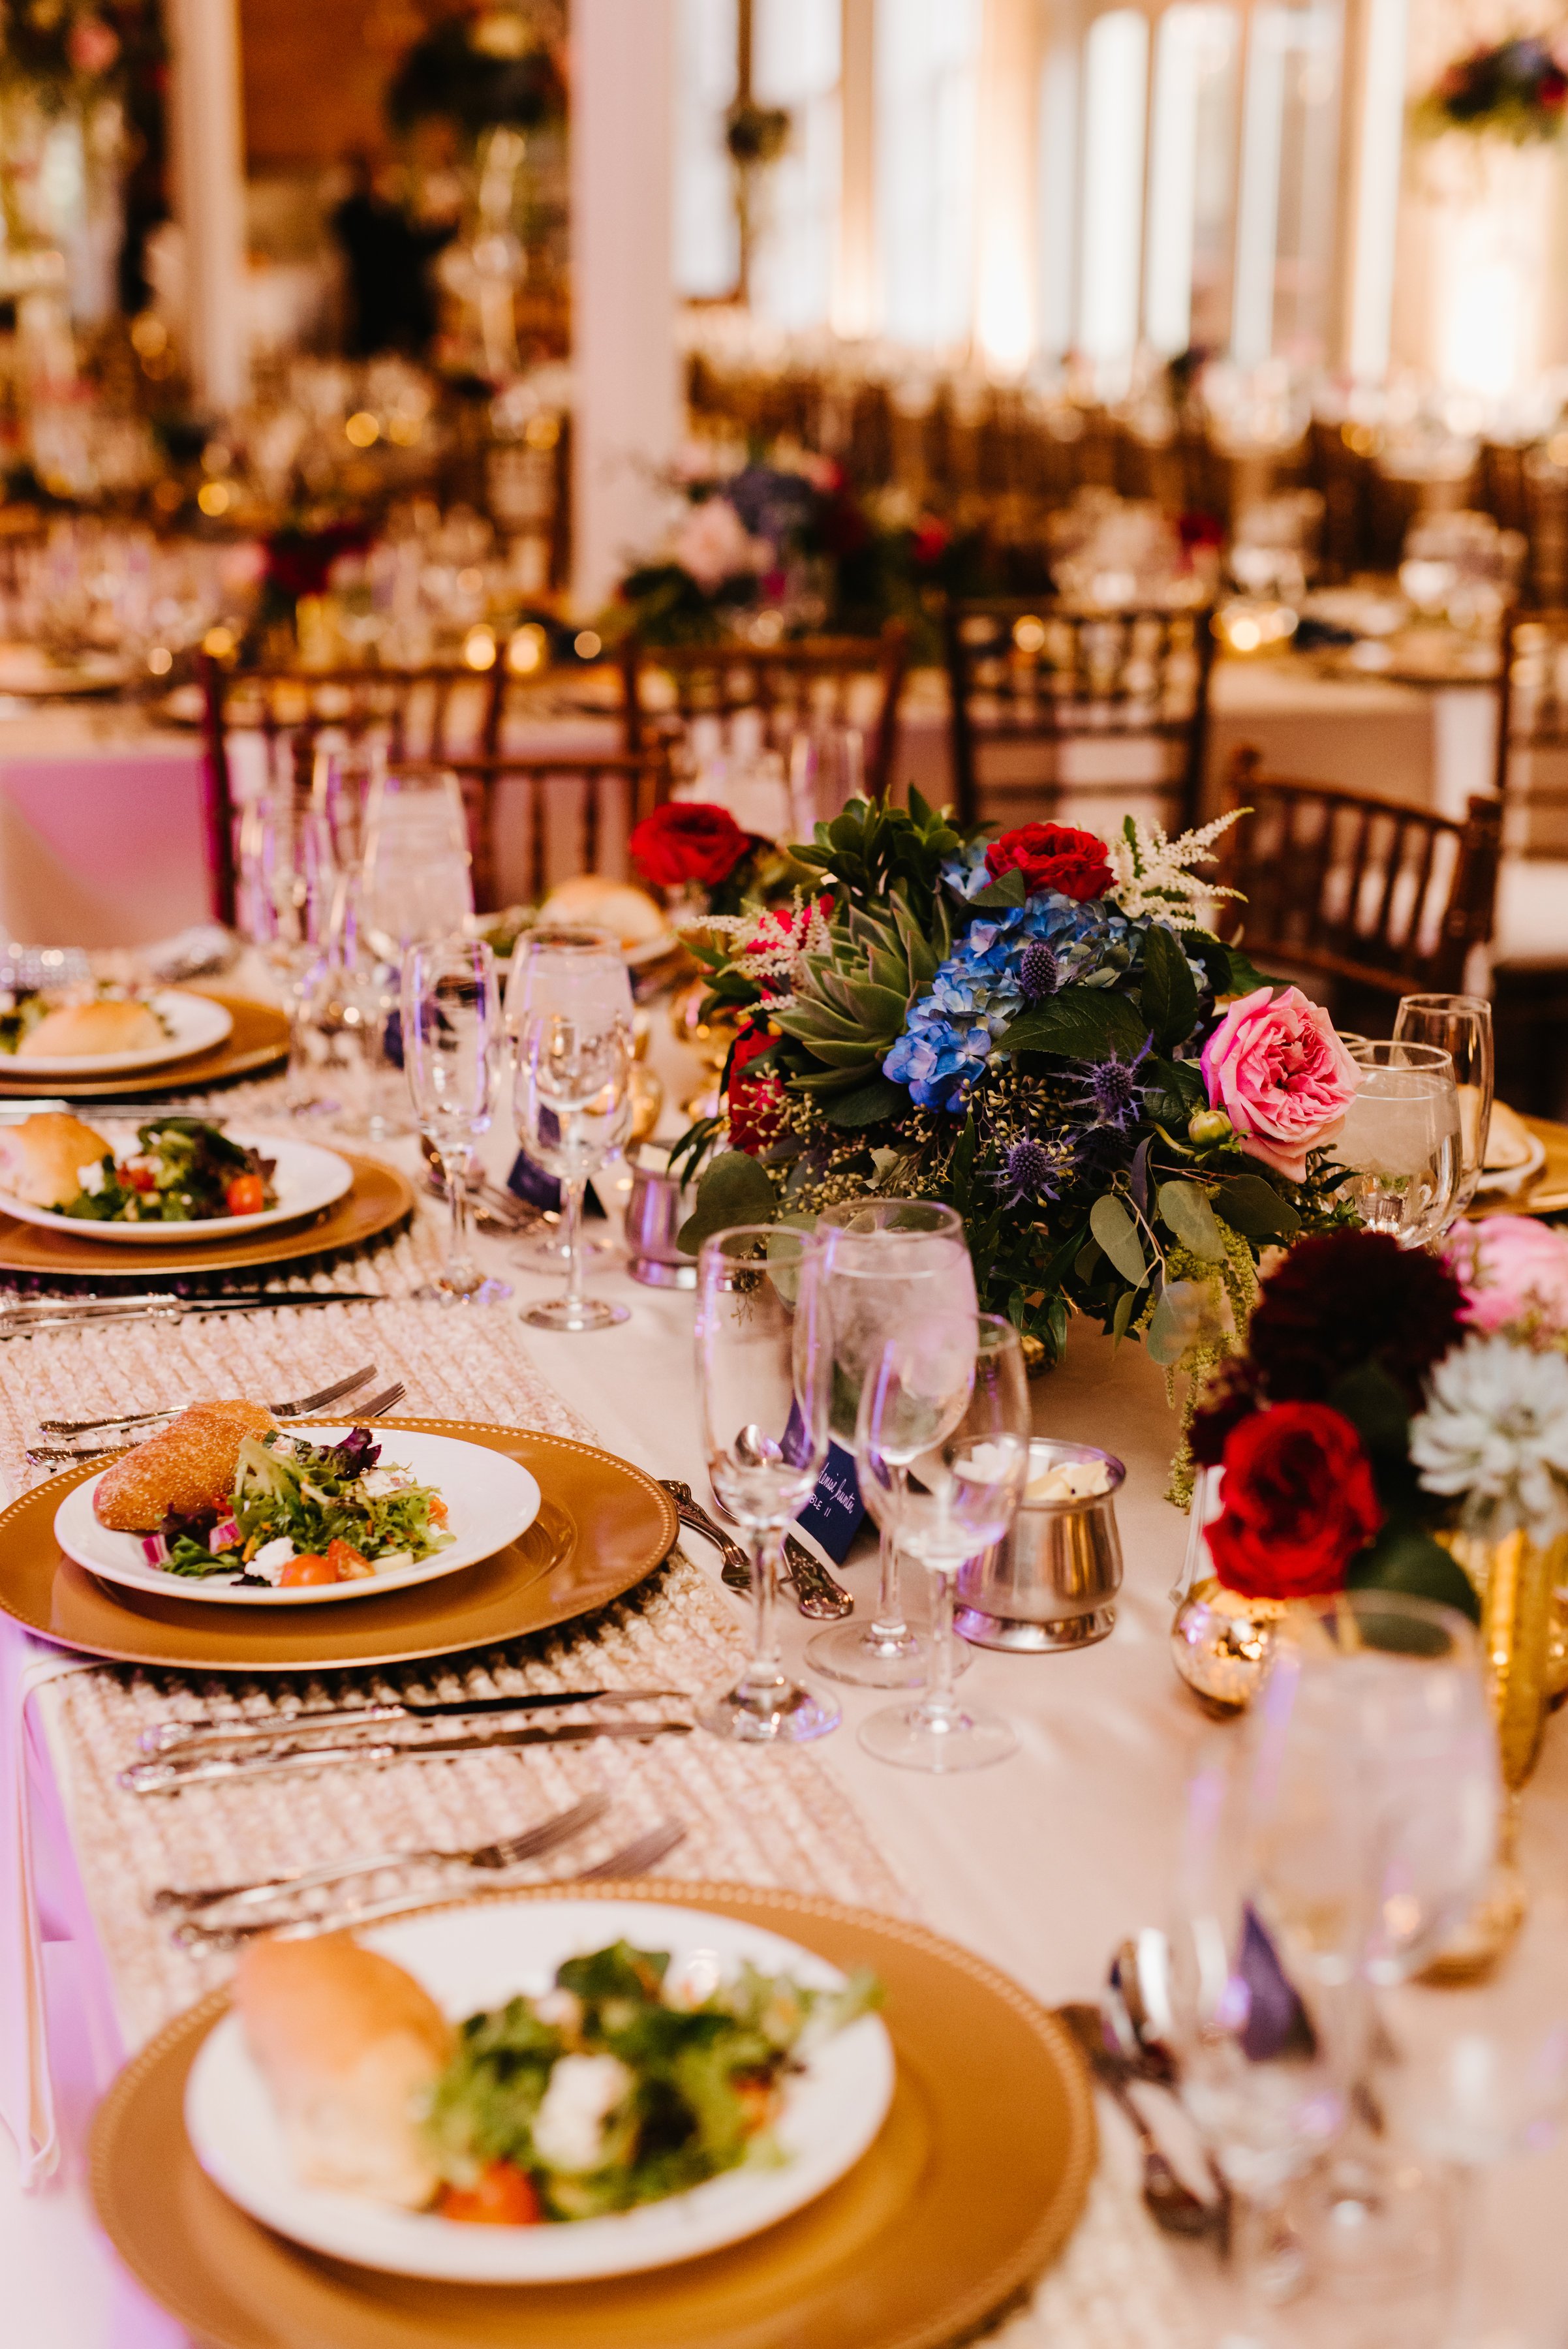 Tablescape at wedding reception bright and gold